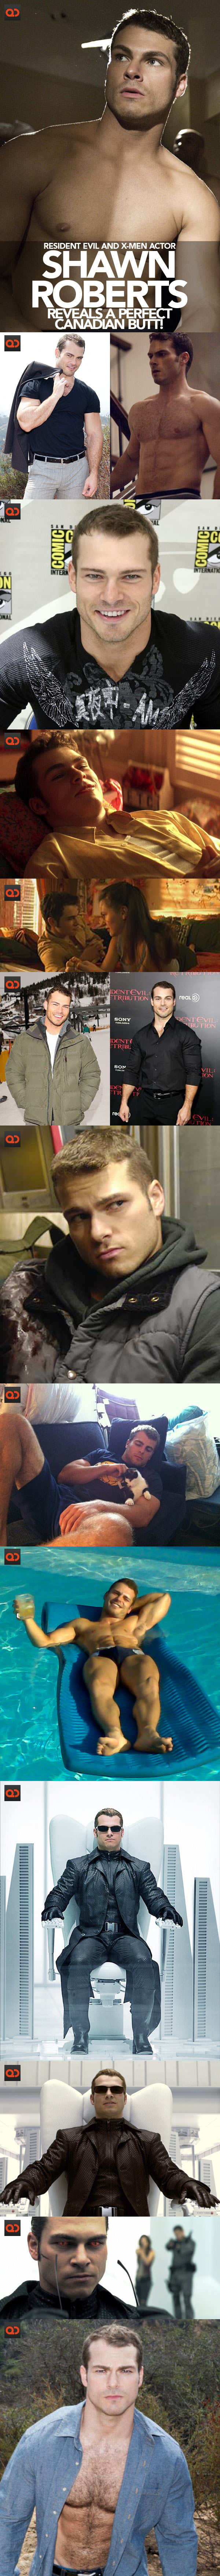 qc-exposed-celebs-shawn_roberts_resident_evil_and_xmen_actor_naked-collage01